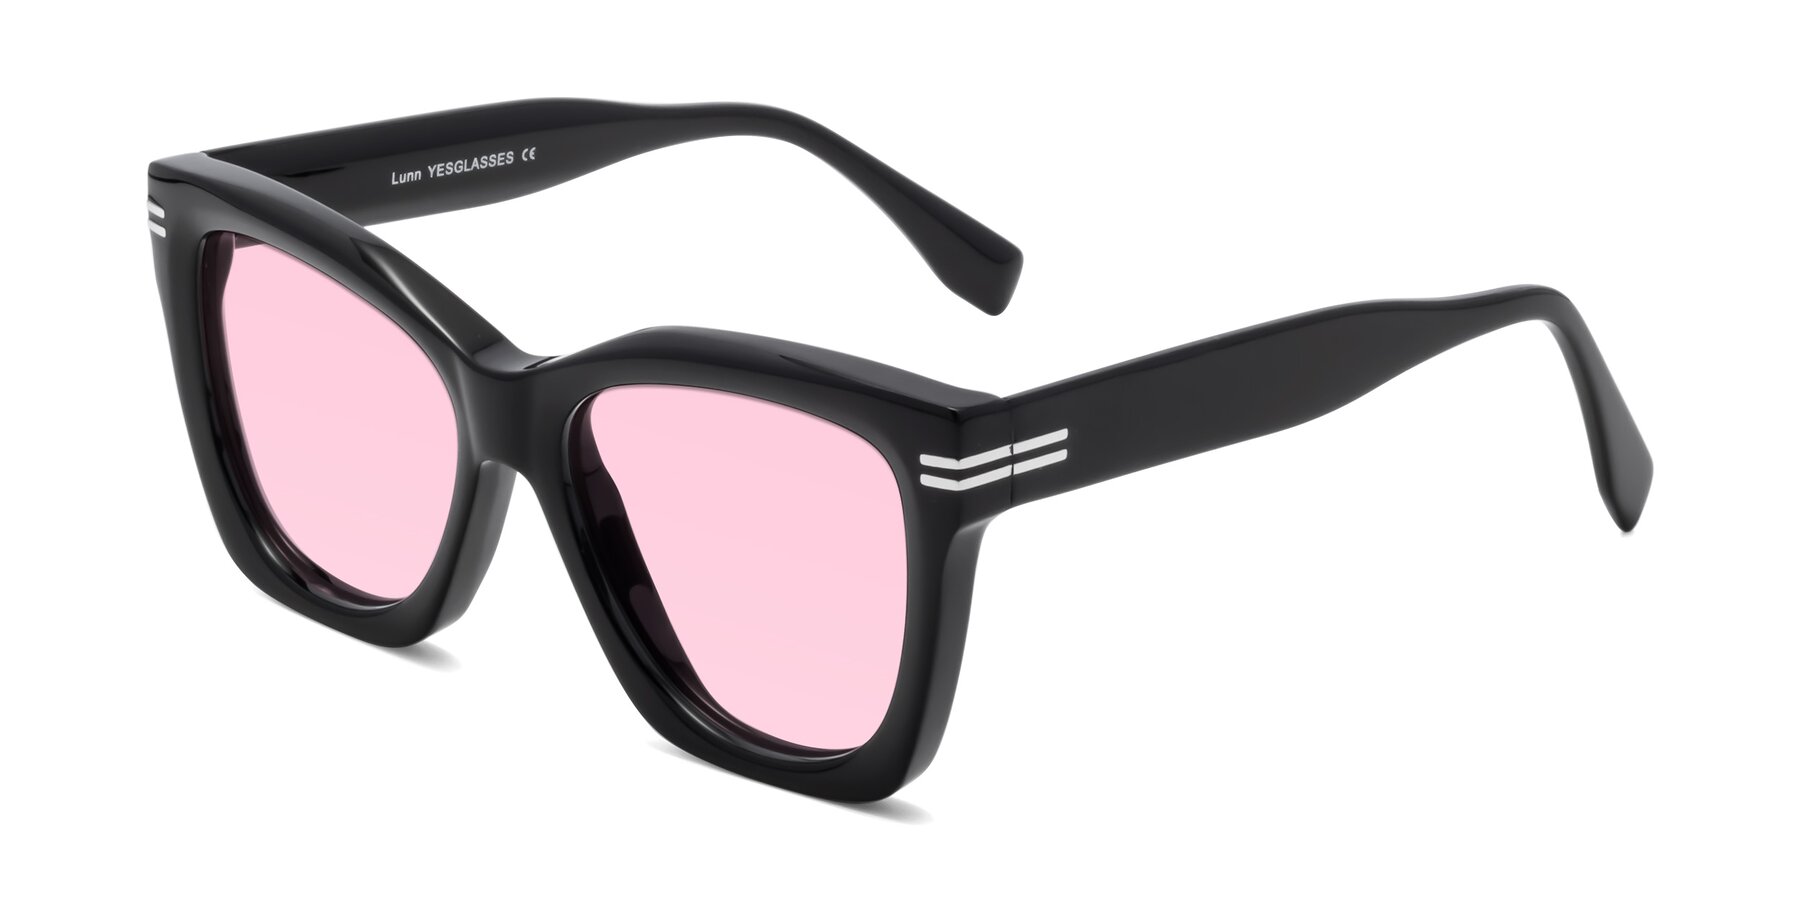 Angle of Lunn in Black with Light Pink Tinted Lenses